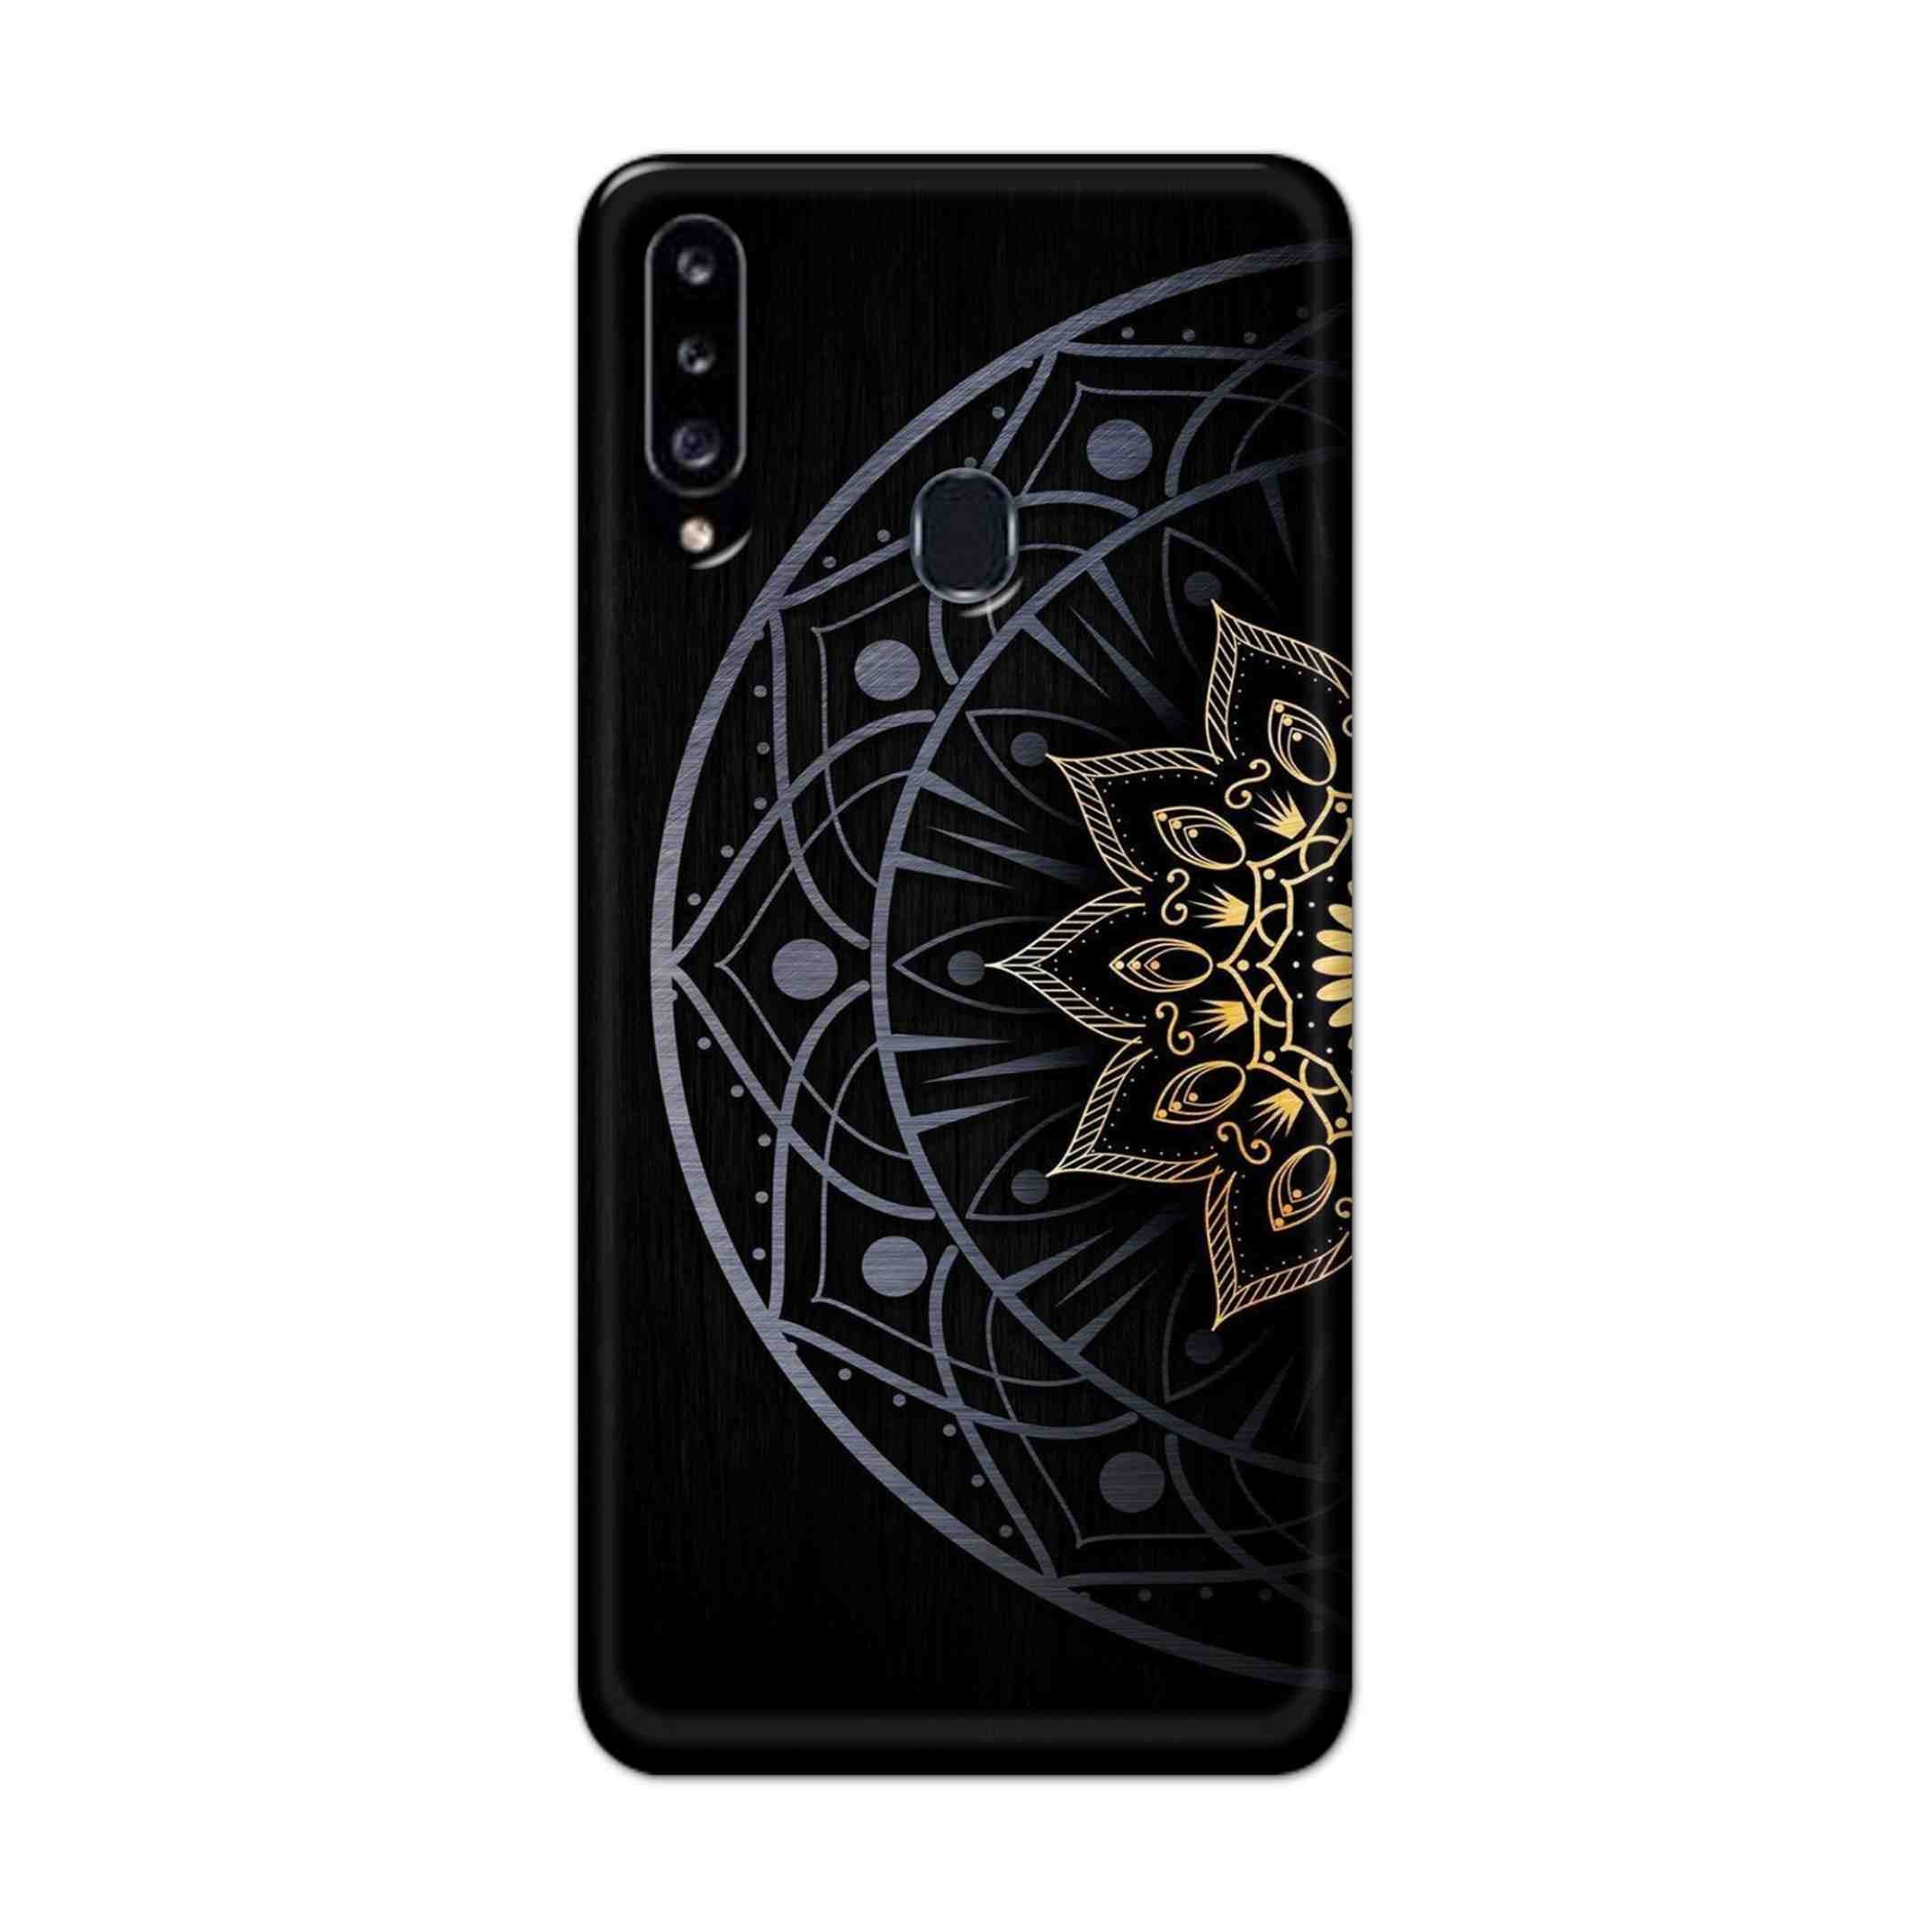 Buy Psychedelic Mandalas Hard Back Mobile Phone Case Cover For Samsung Galaxy A21 Online